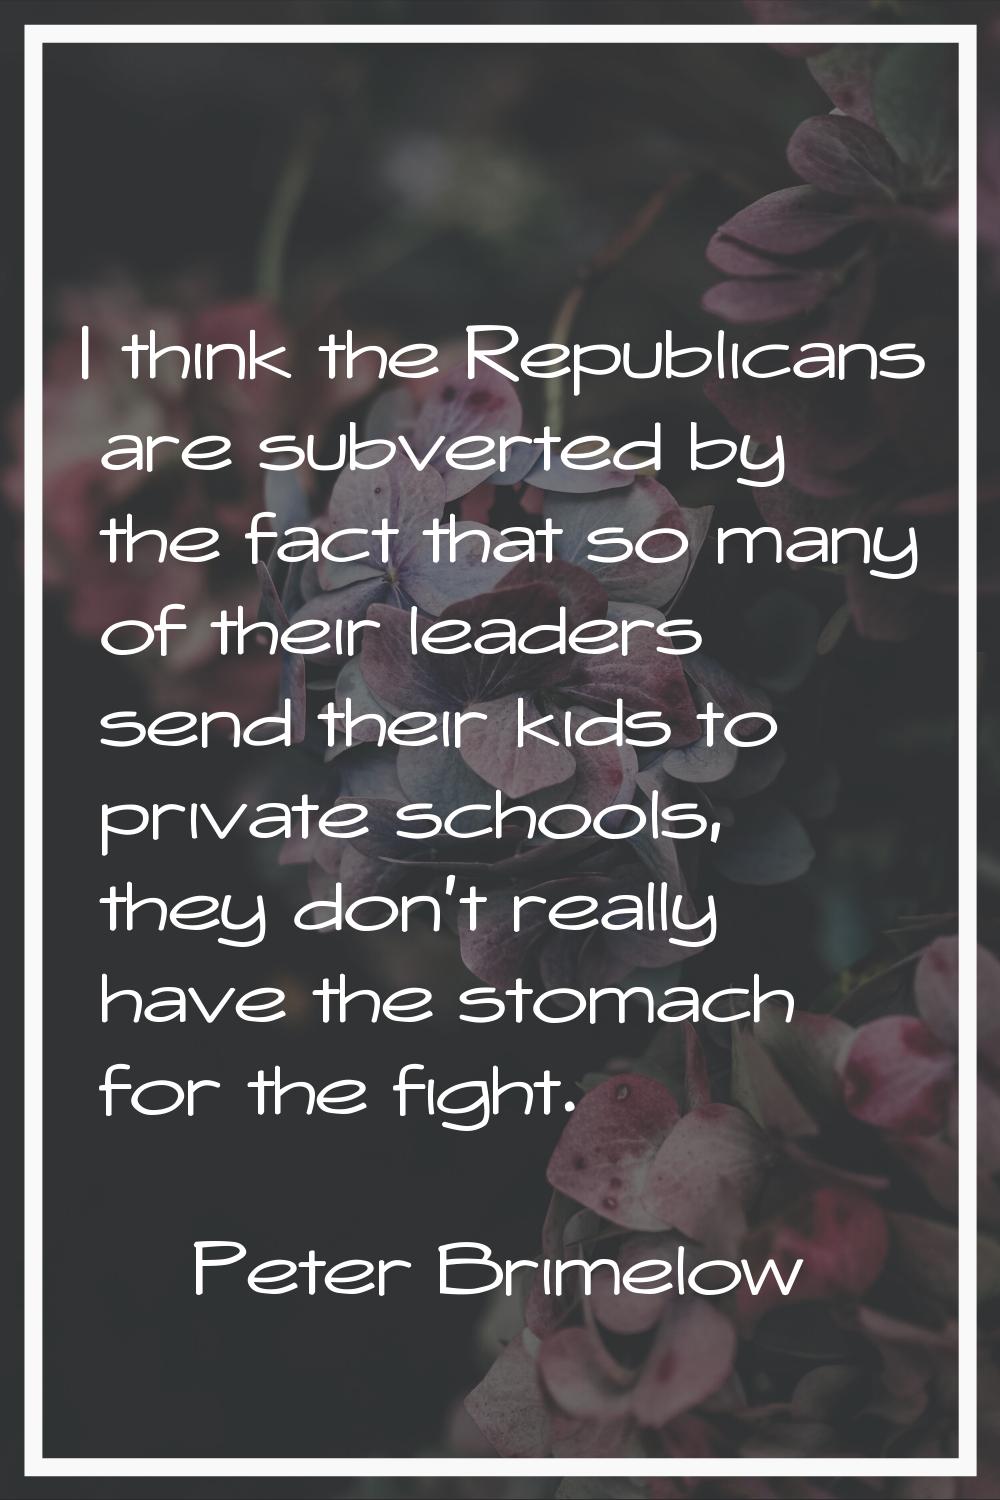 I think the Republicans are subverted by the fact that so many of their leaders send their kids to 